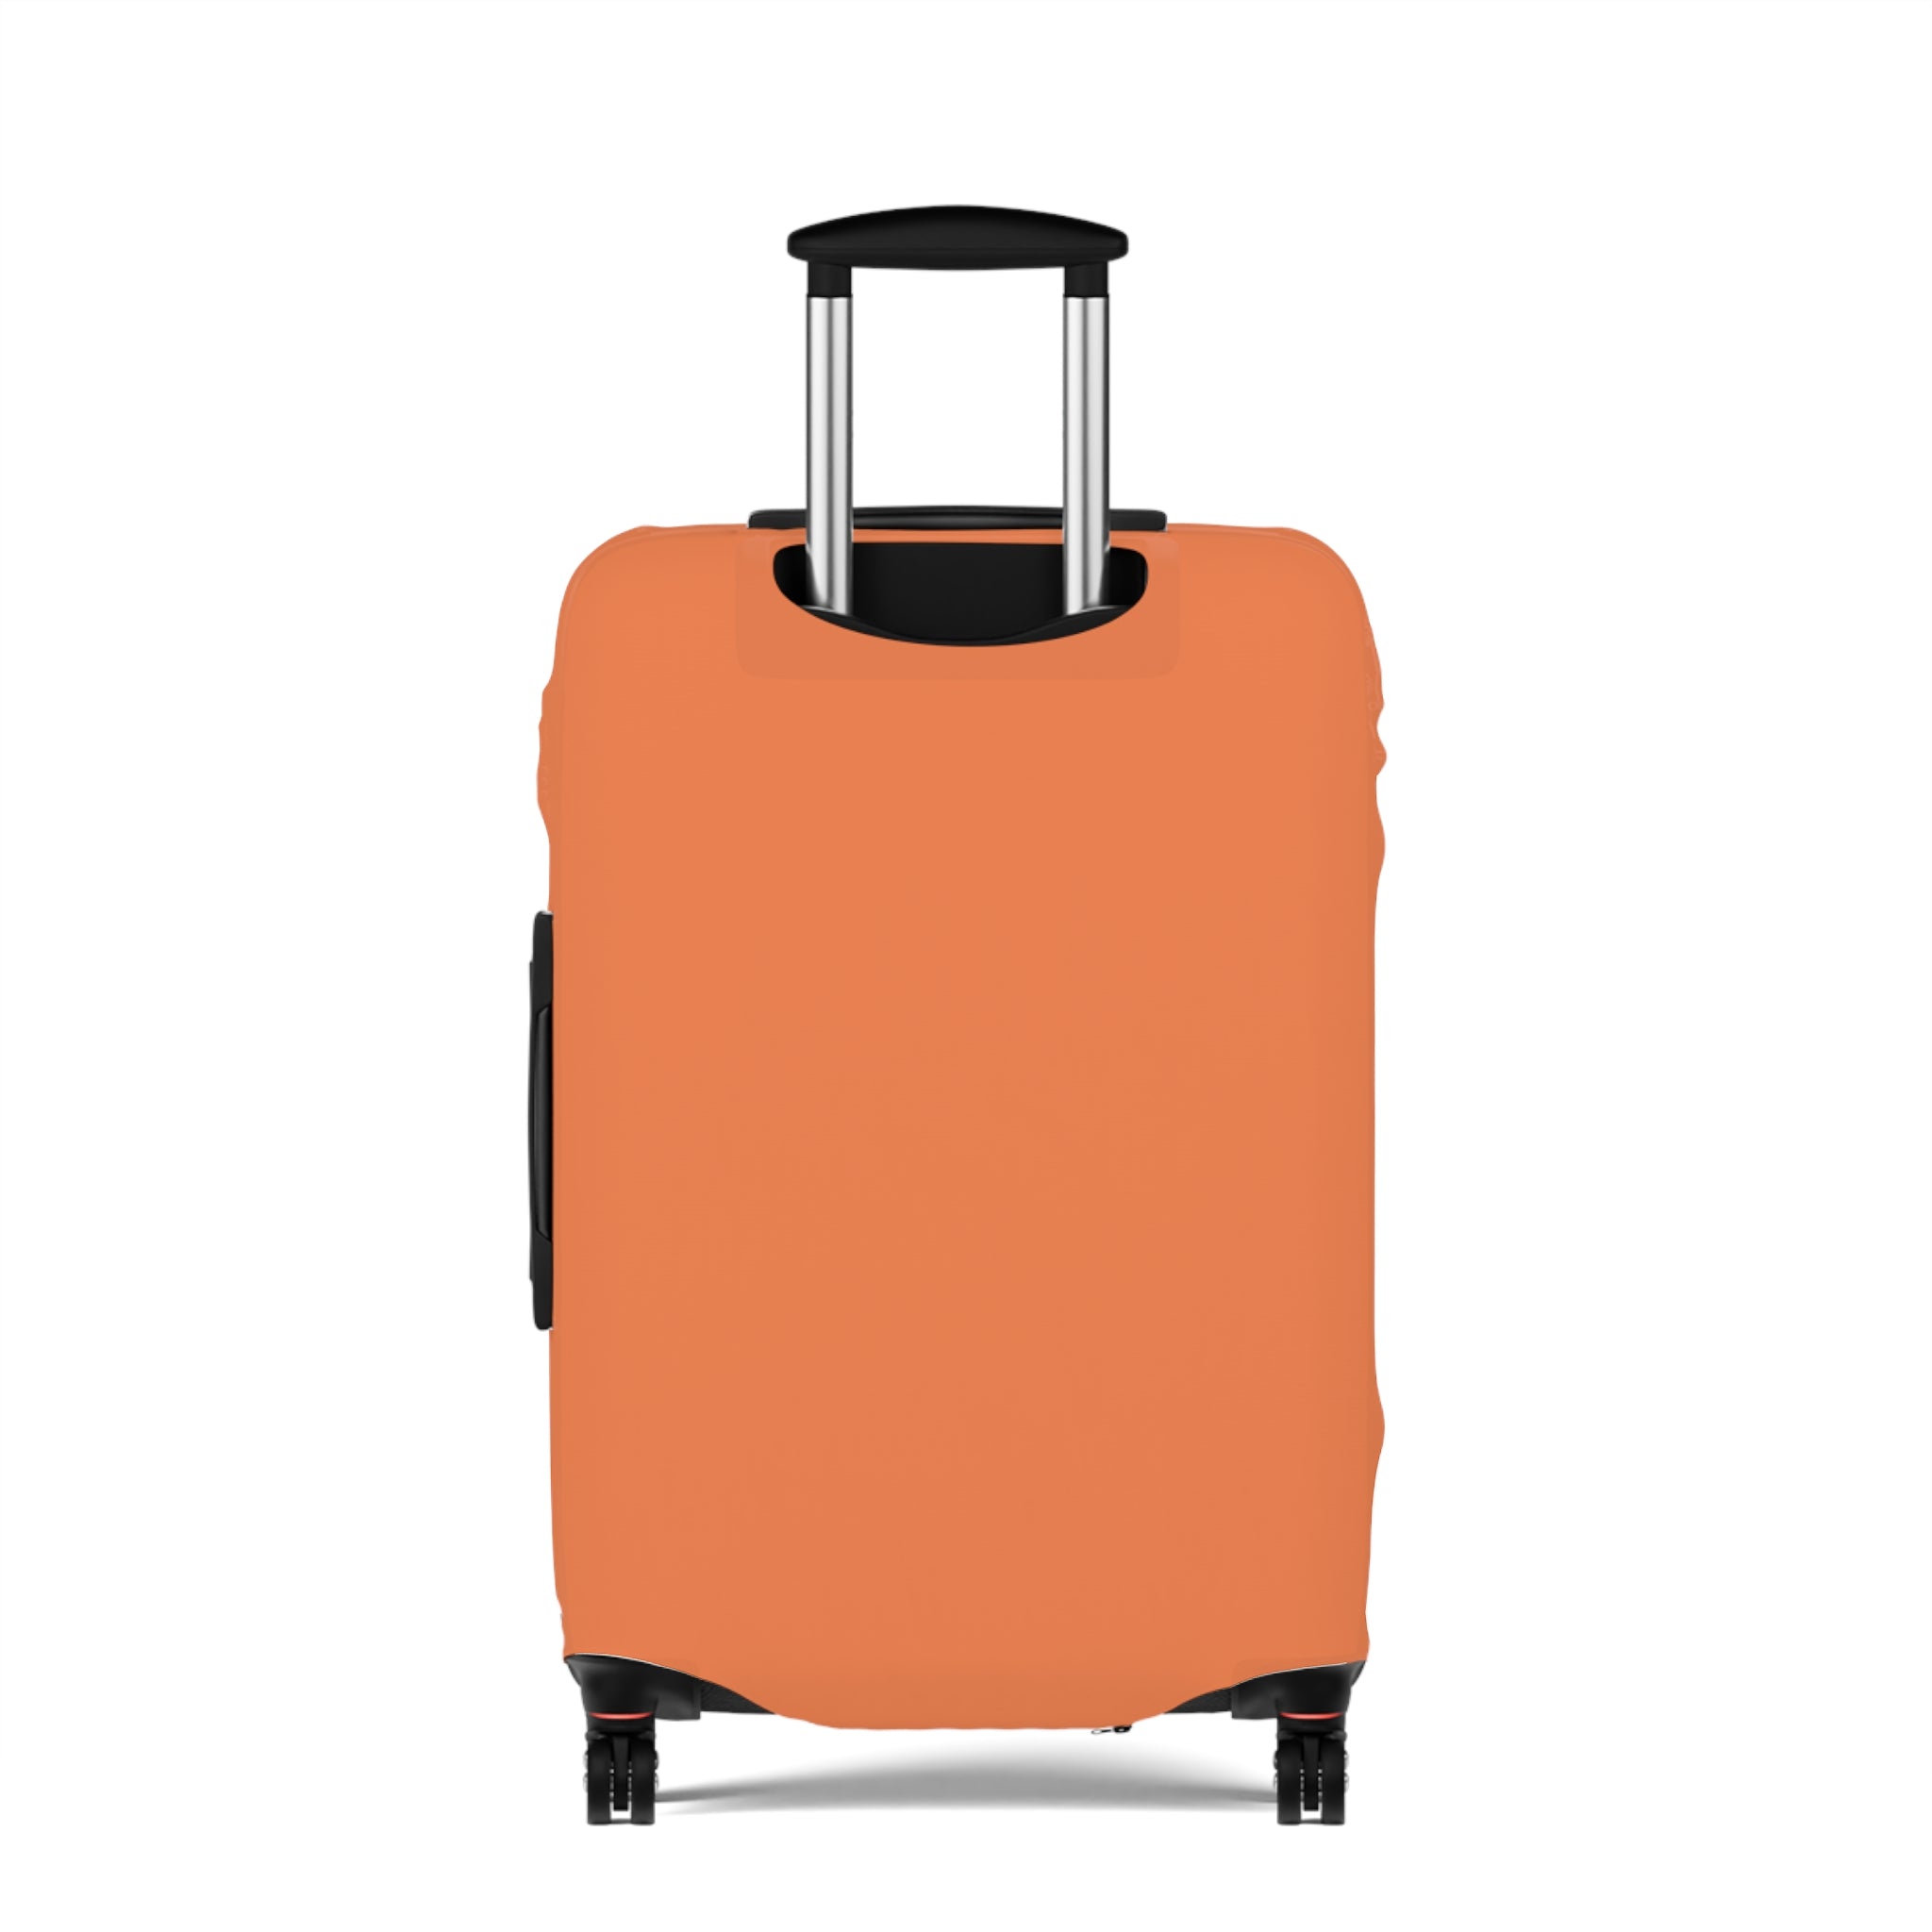 Born to fly Luggage Cover (Orange)